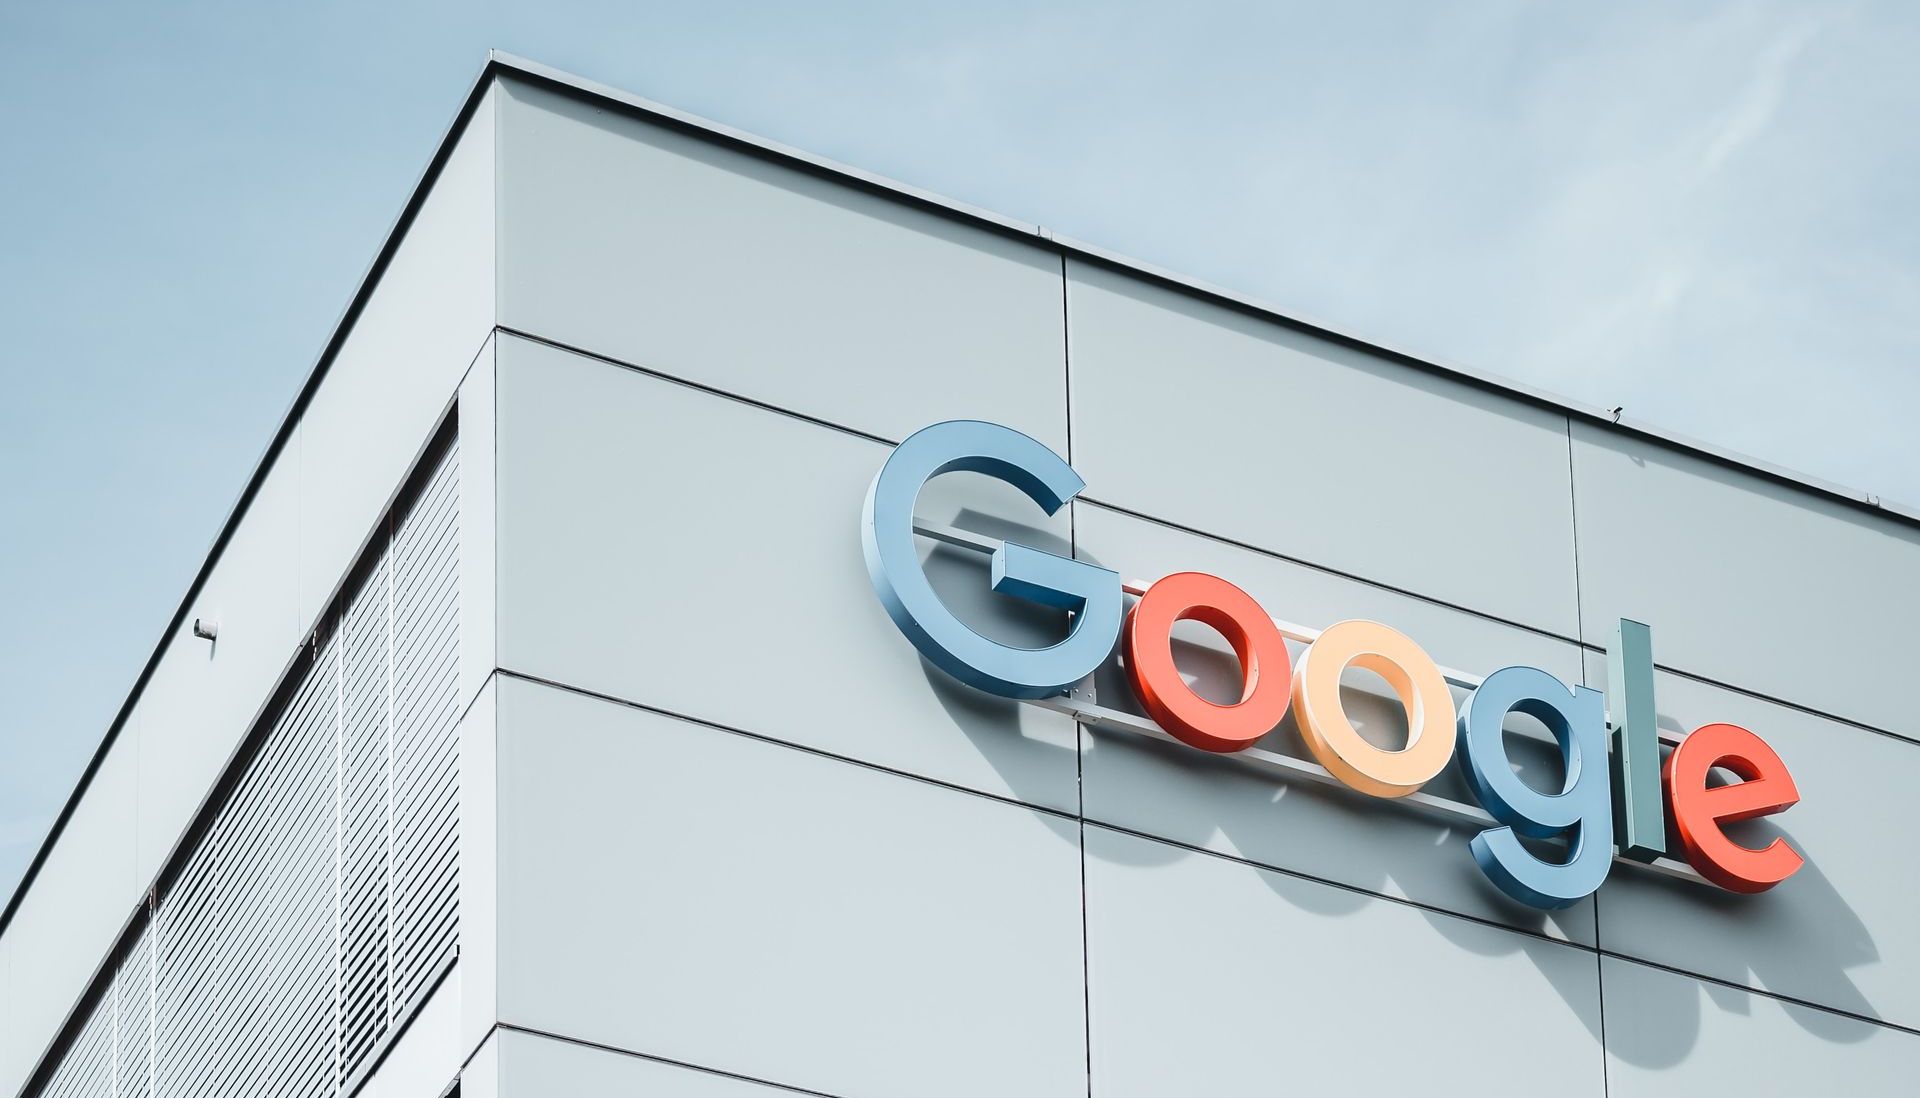 Google announces more layoffs are on the way